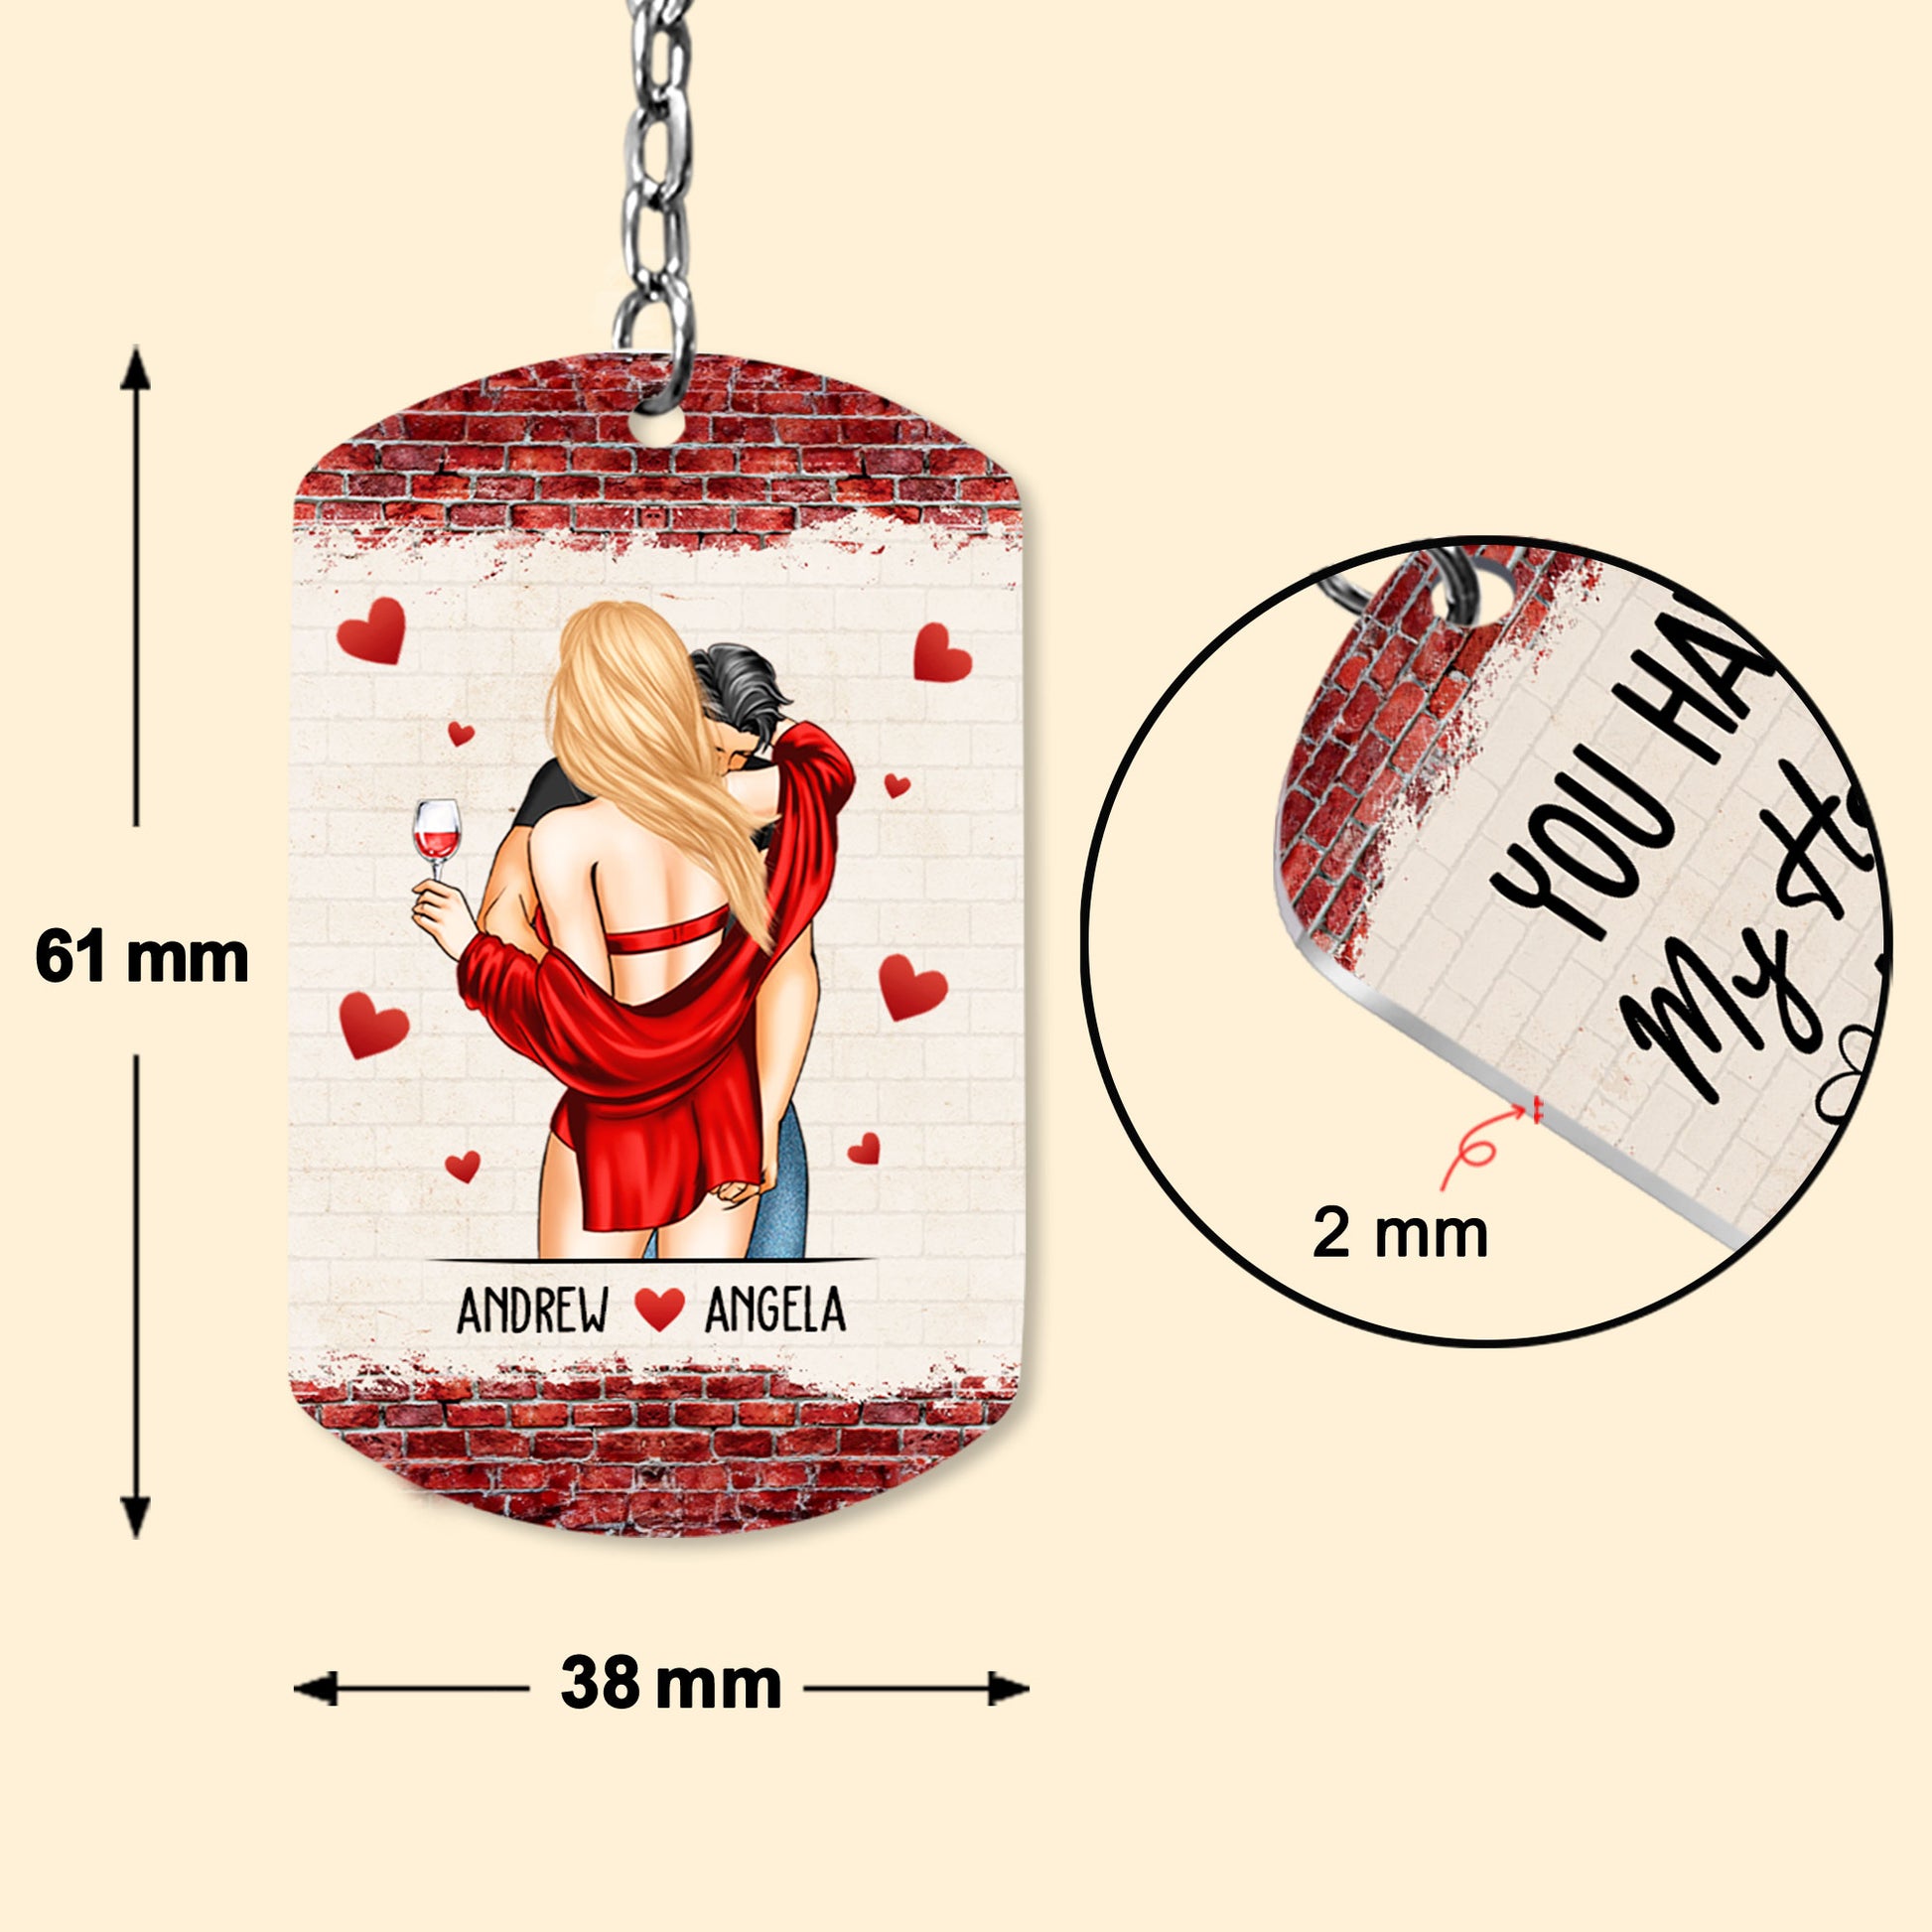 InterestPod You Have My Heart and My Ass - Personalized Keychain - Valentine Gift for Couple HA00